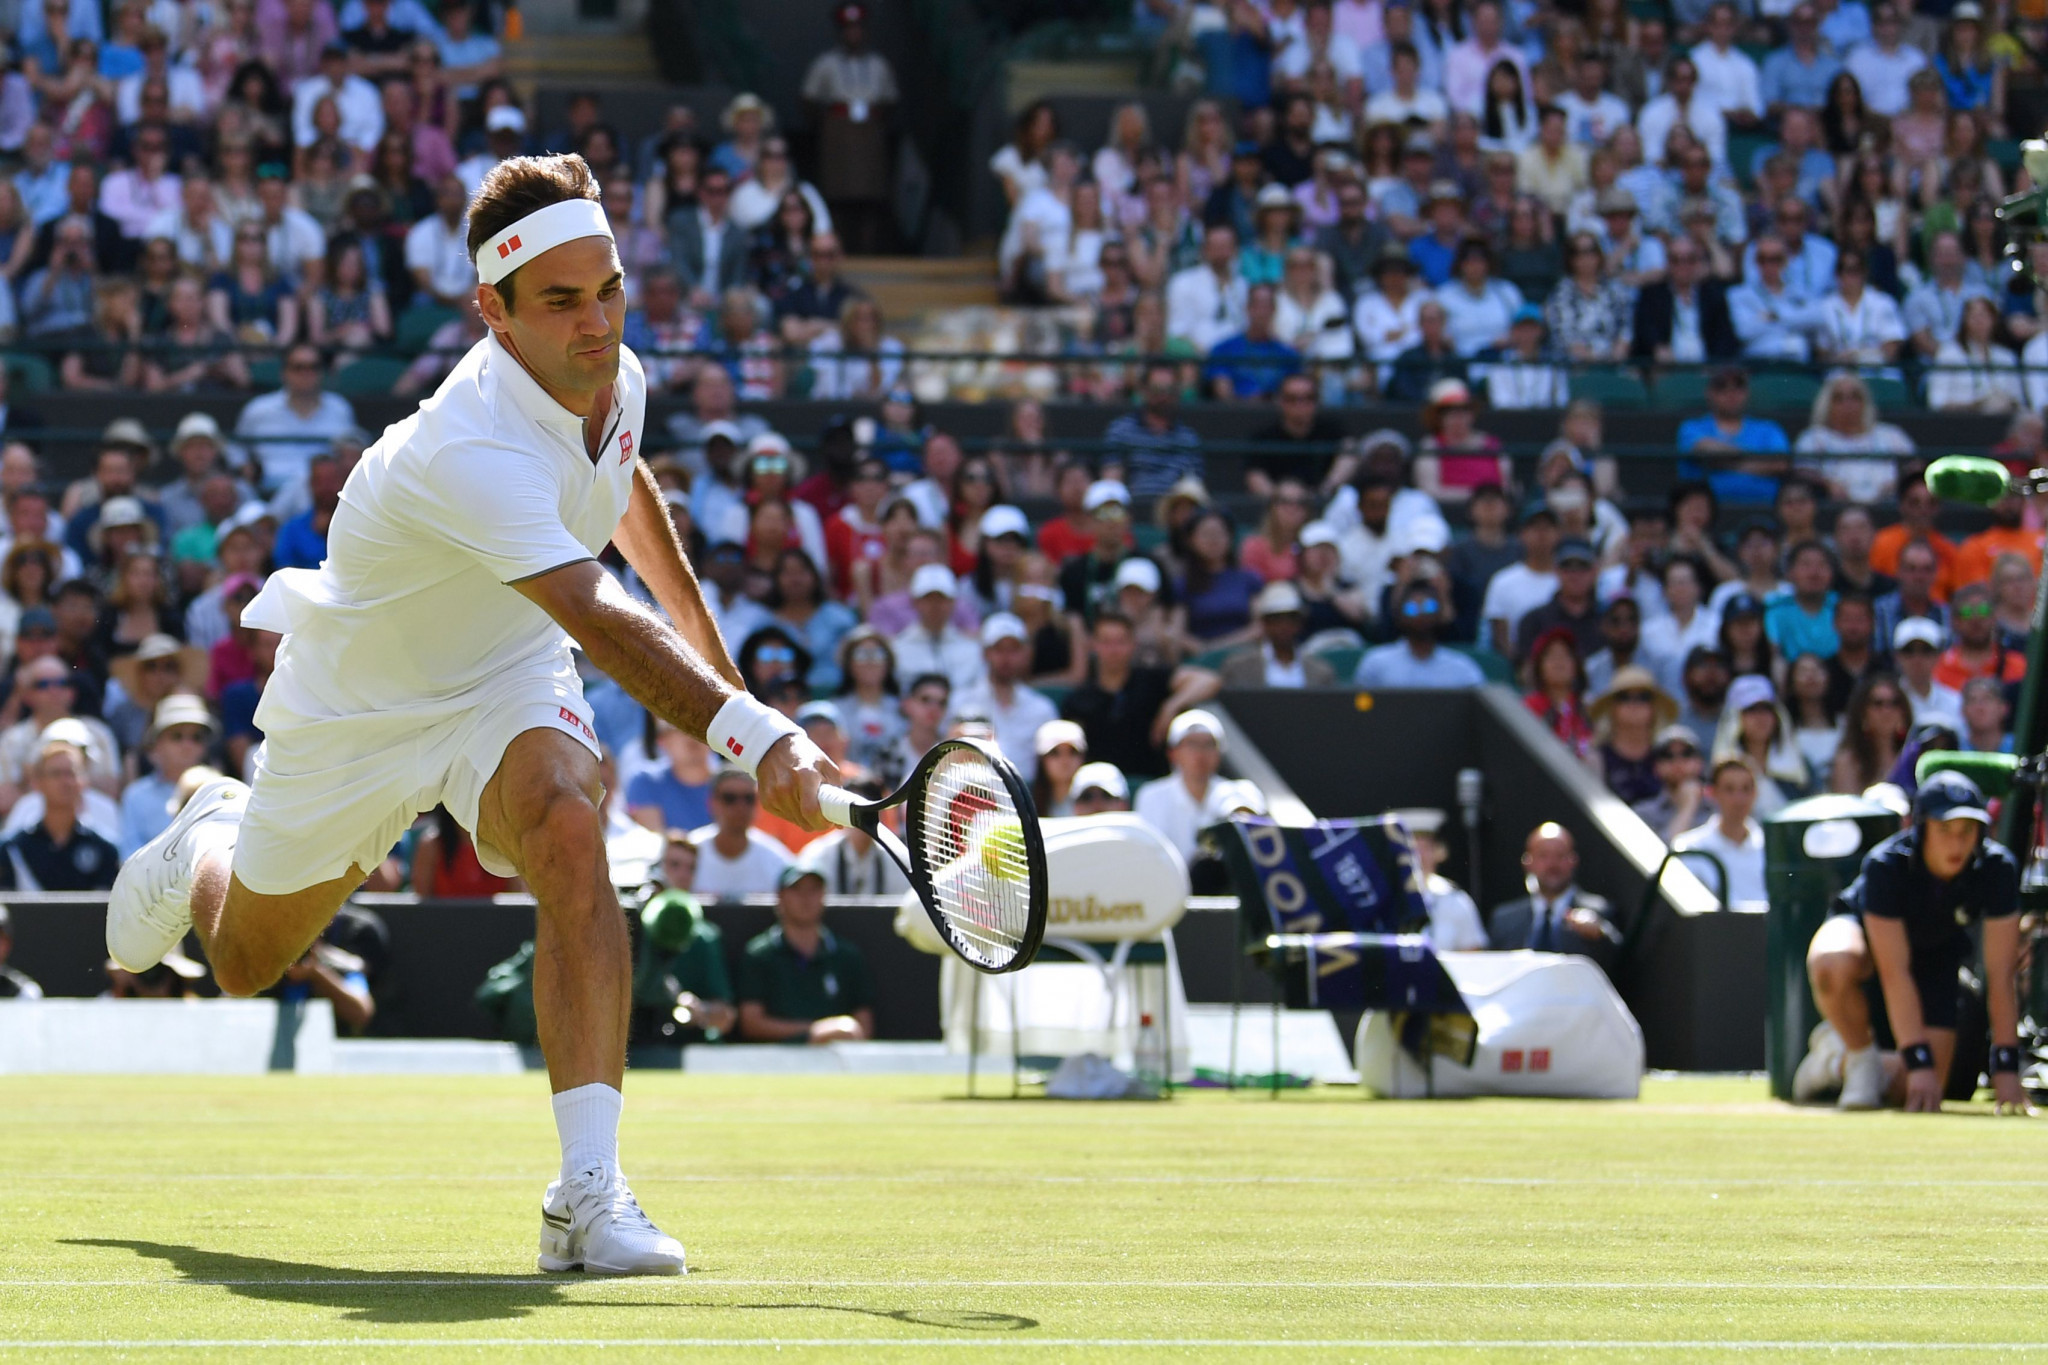 Eight-times Wimbledon champion Roger Federer cruised into the third round at the expense of British wild card Jay Clarke ©Getty Images